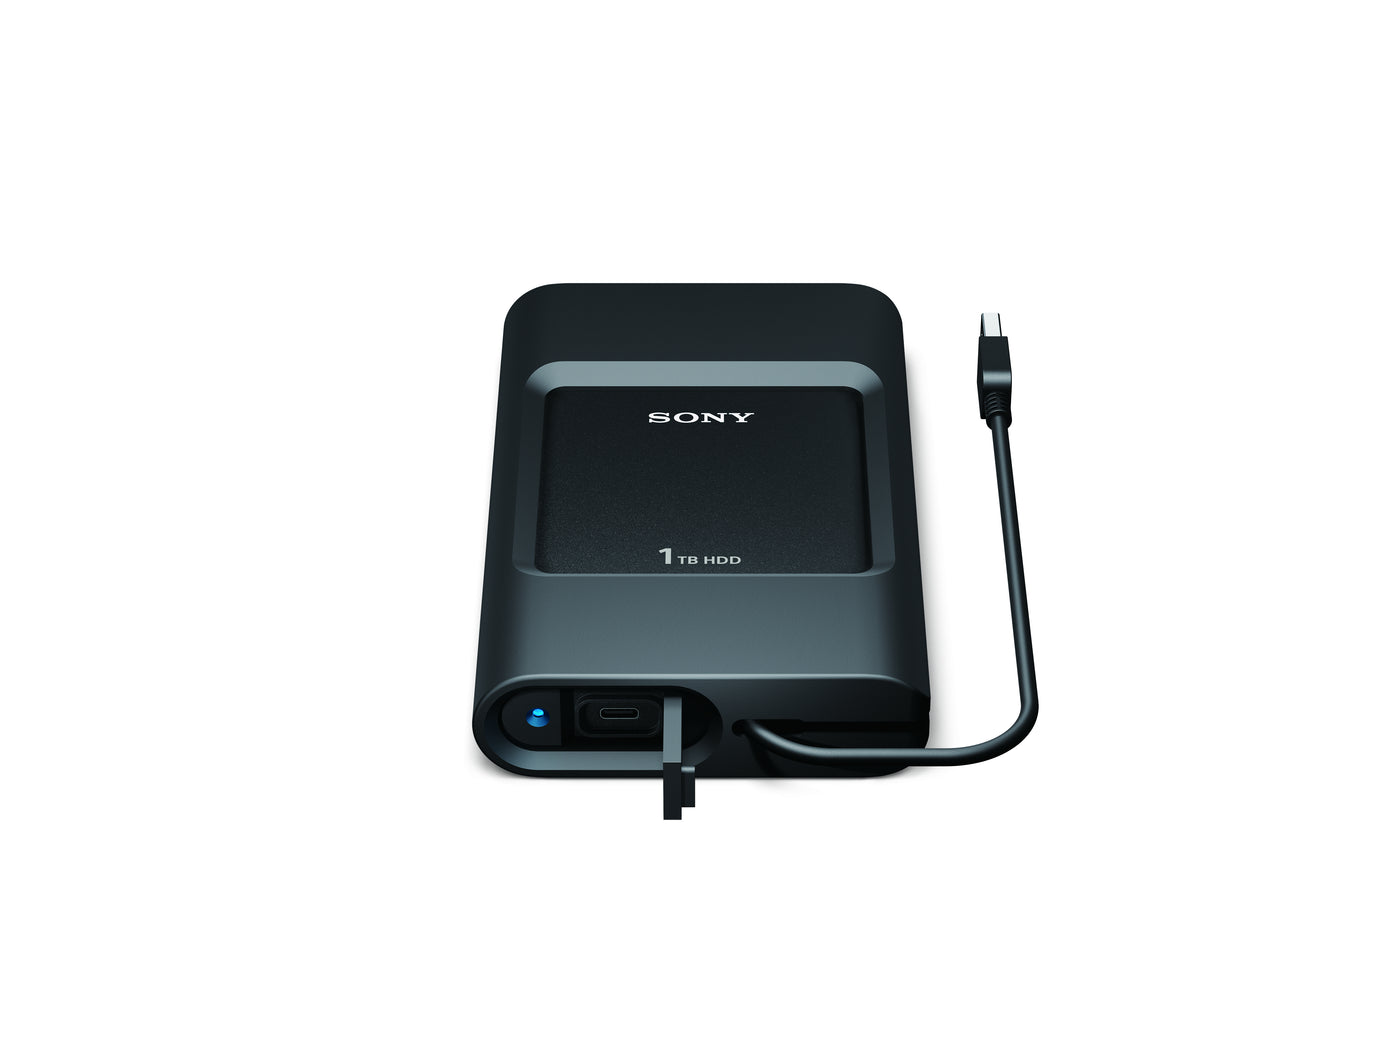 SONY Ruggedized Portable External Drive with USB 3.0 and USB-C